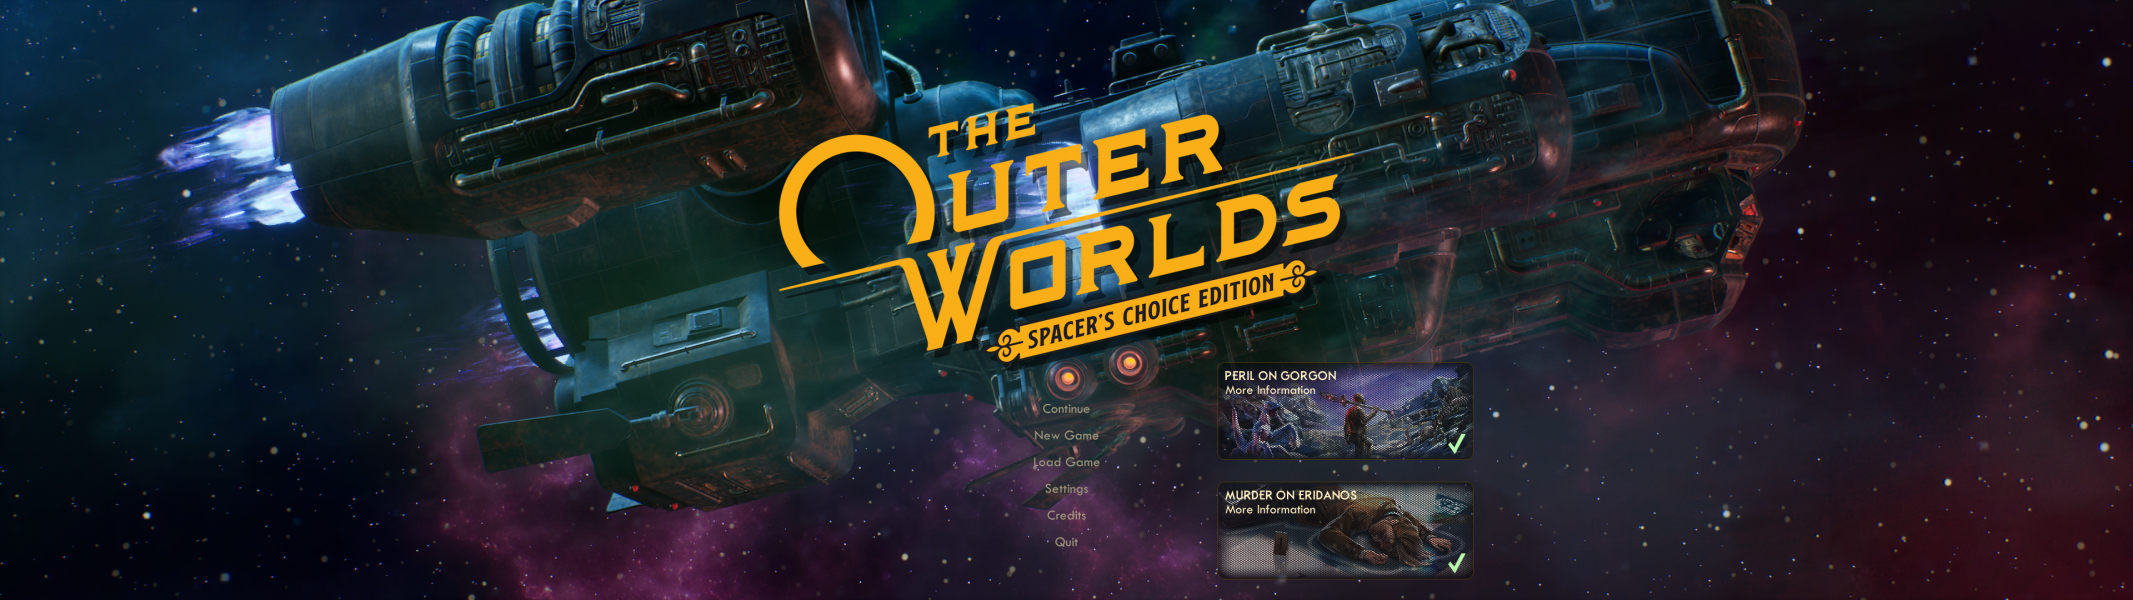 The Outer Worlds: Spacer's Choice Edition Reviews - OpenCritic